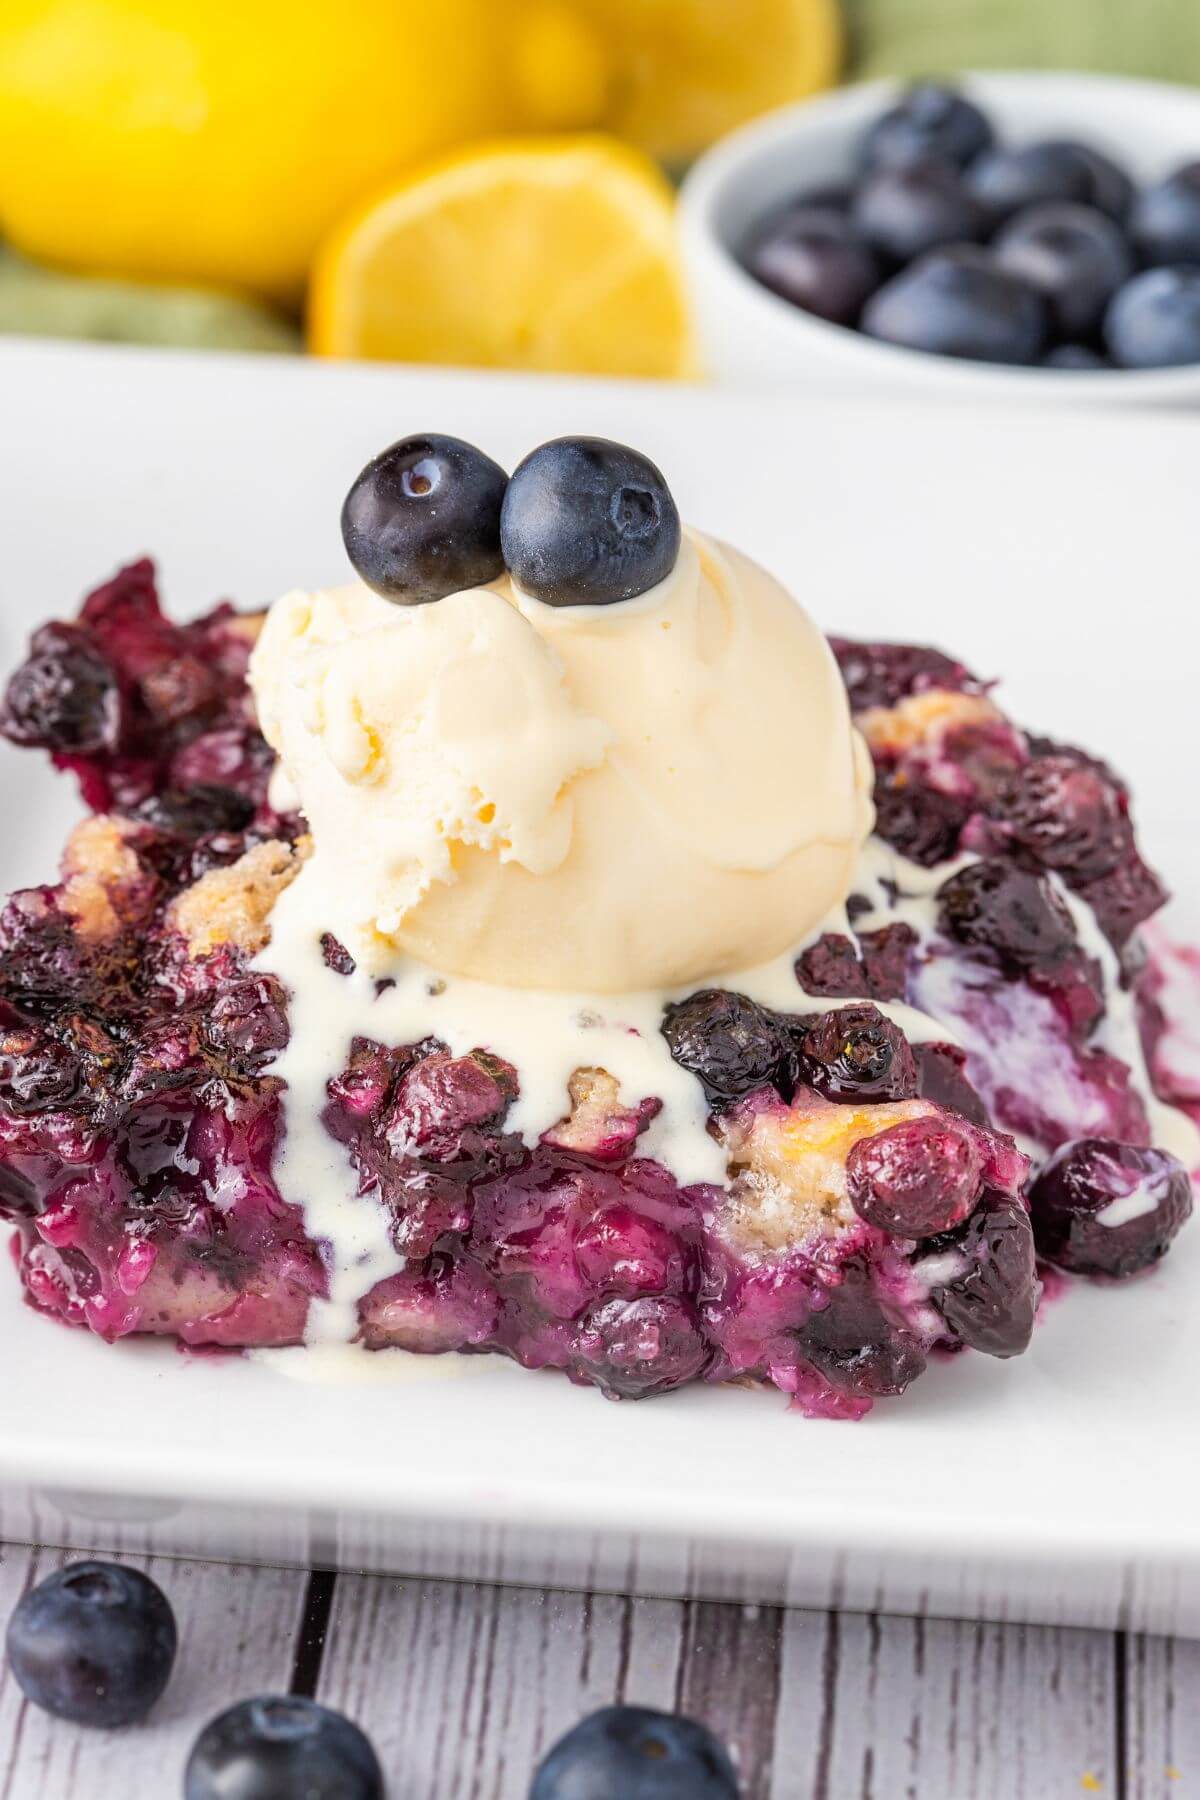 Blueberries baked in a cobbler are covered in melty ice cream.